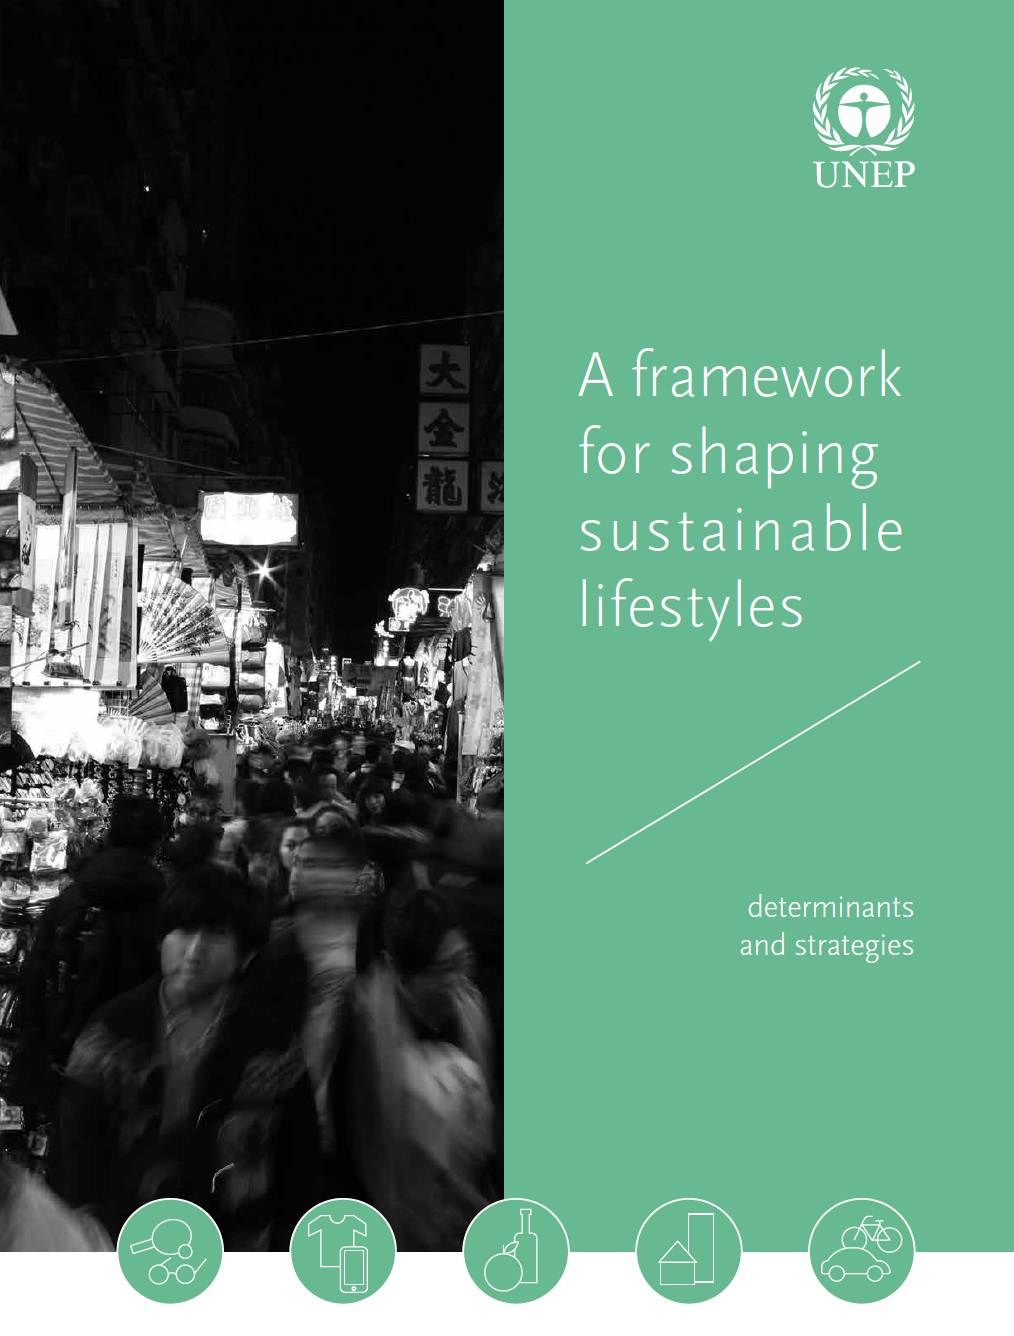 A framework for shaping sustainable lifestyles